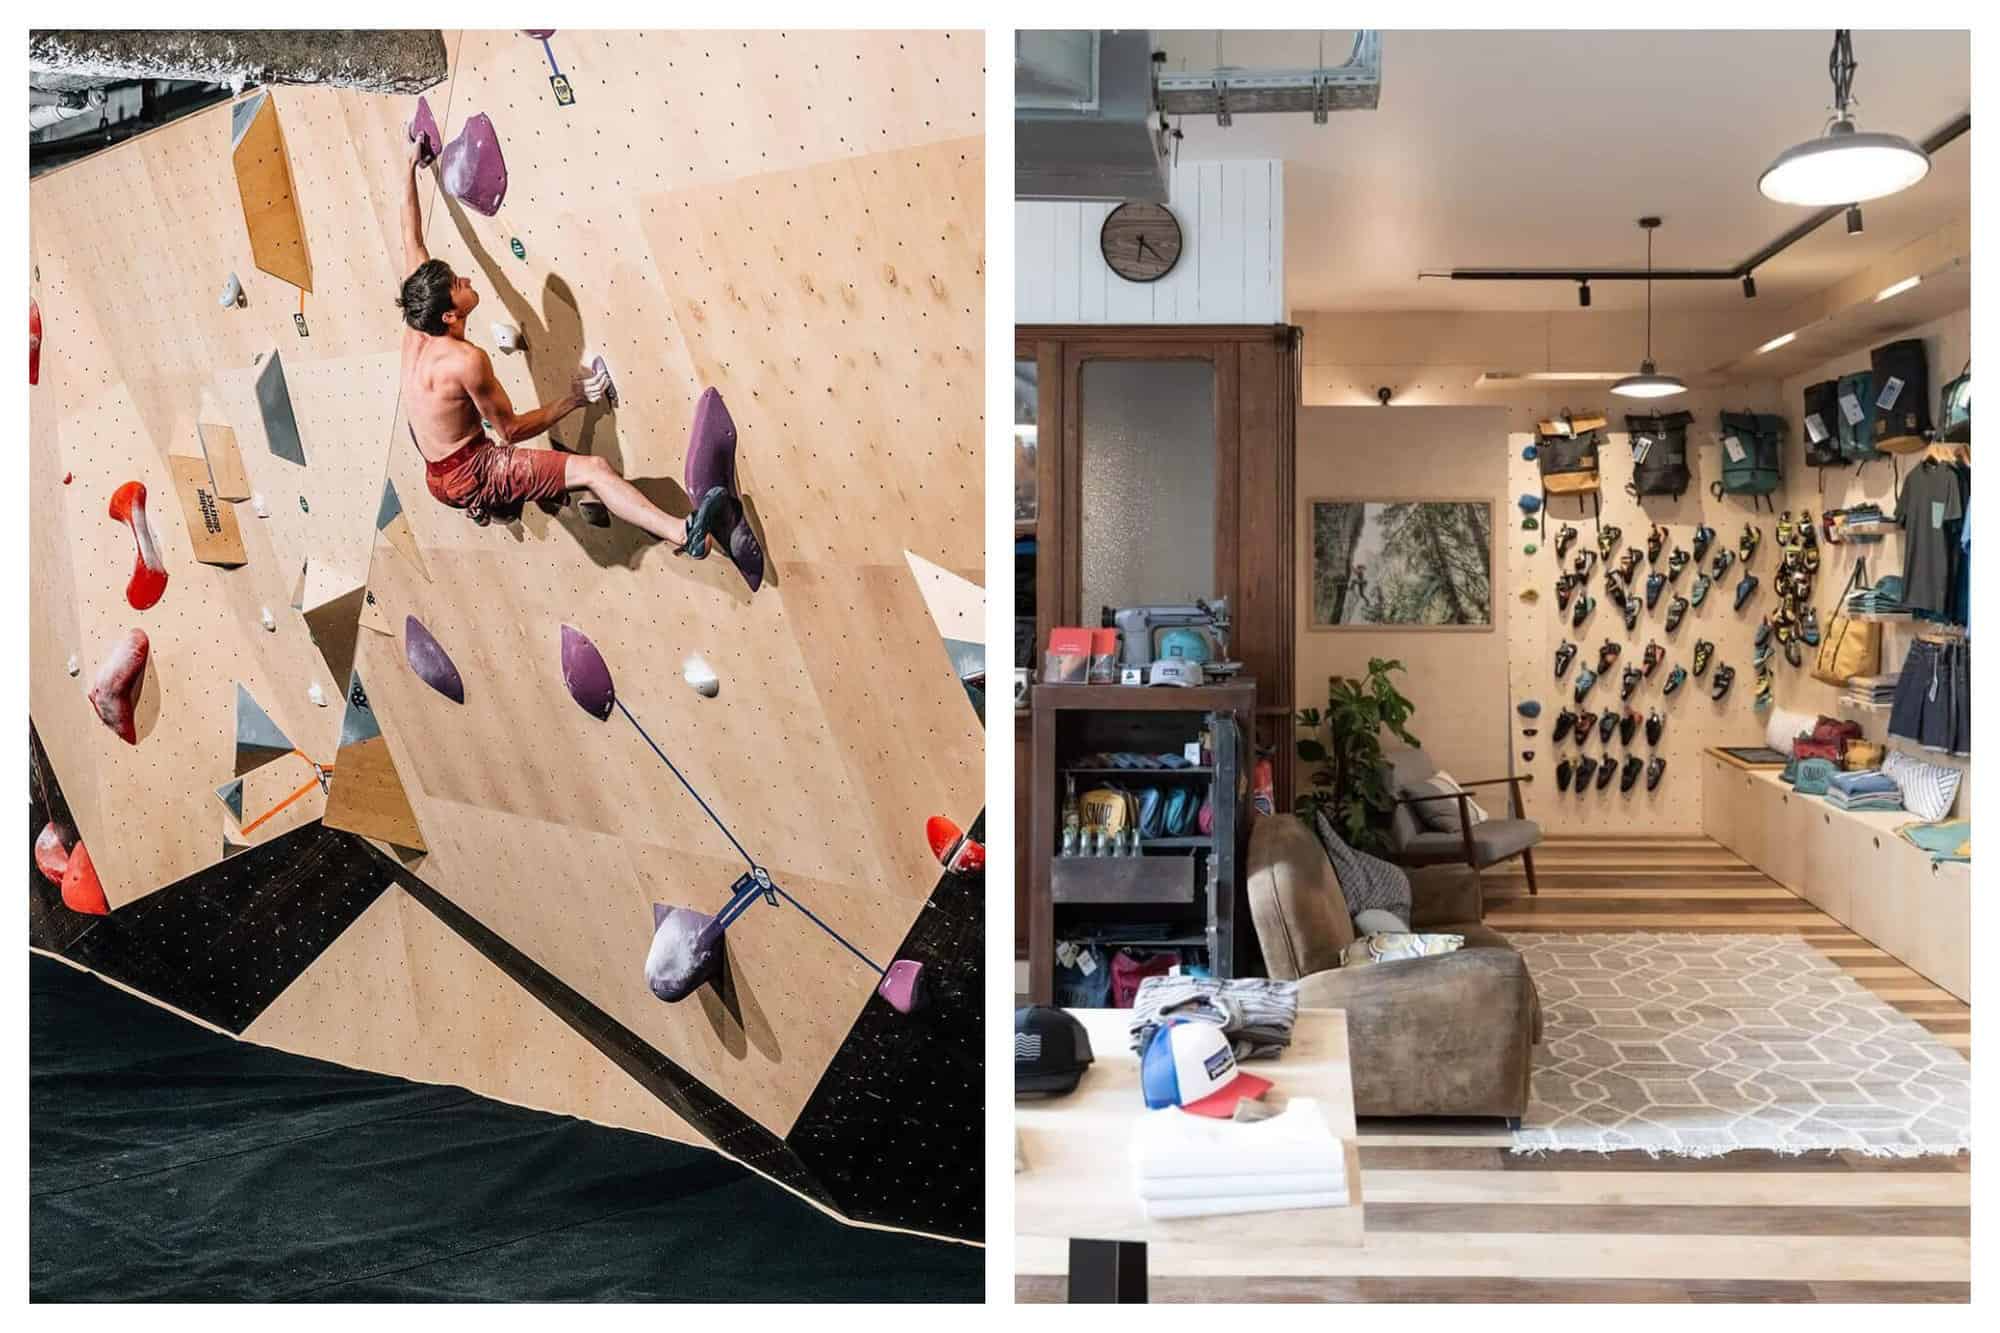 Climber Diego Fourbet is poised to make the final move on an overhanging bouldering route in Climbing District. The shop at Arkose Nation with a selection of climbing shoes, bags and clothes hanging on the wall.